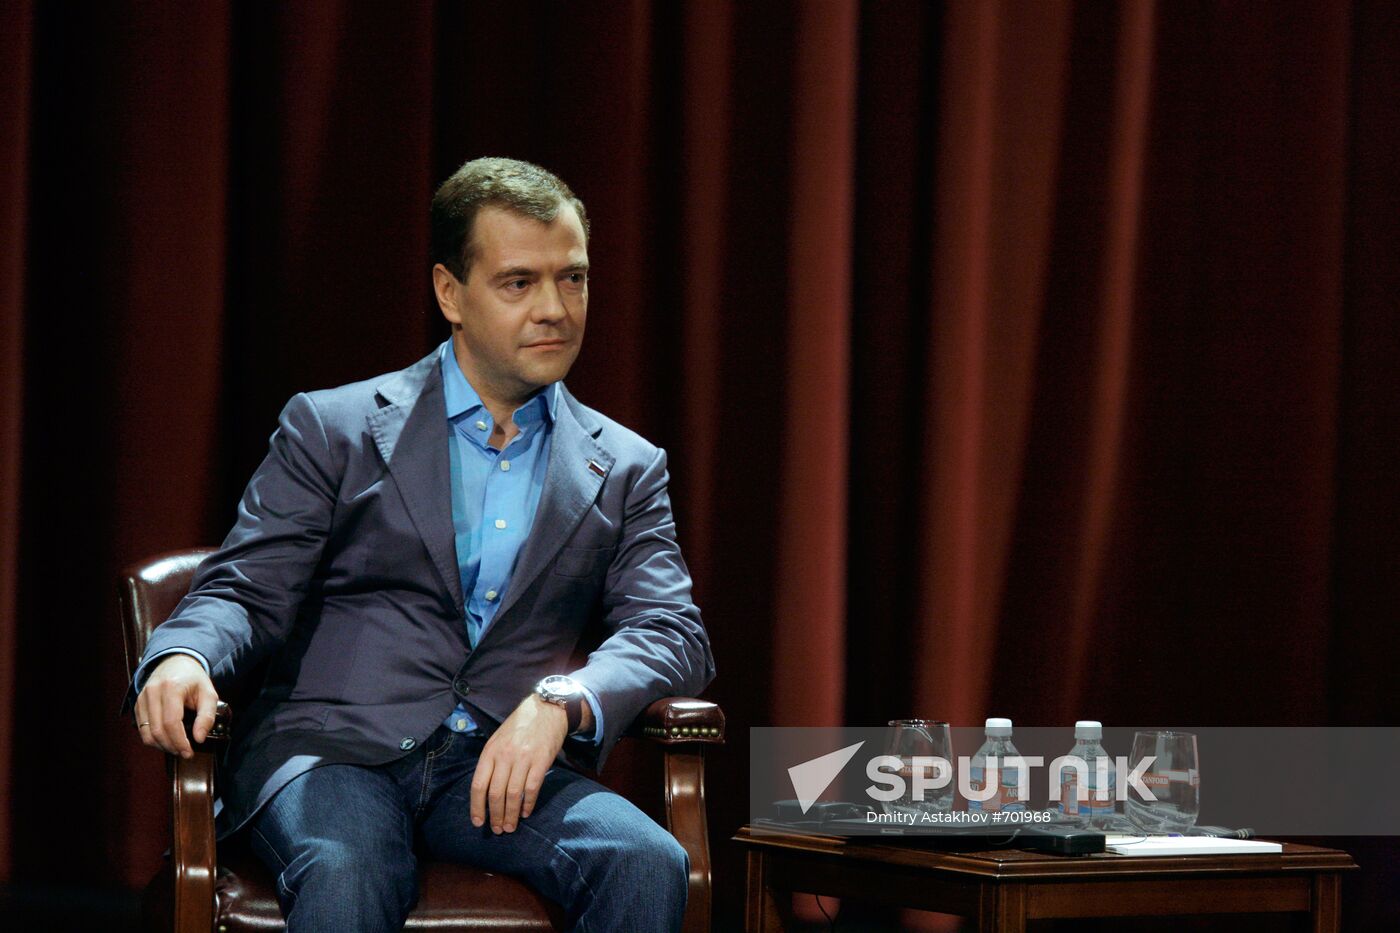 Dmitry Medvedev visit to the U.S. Day Two